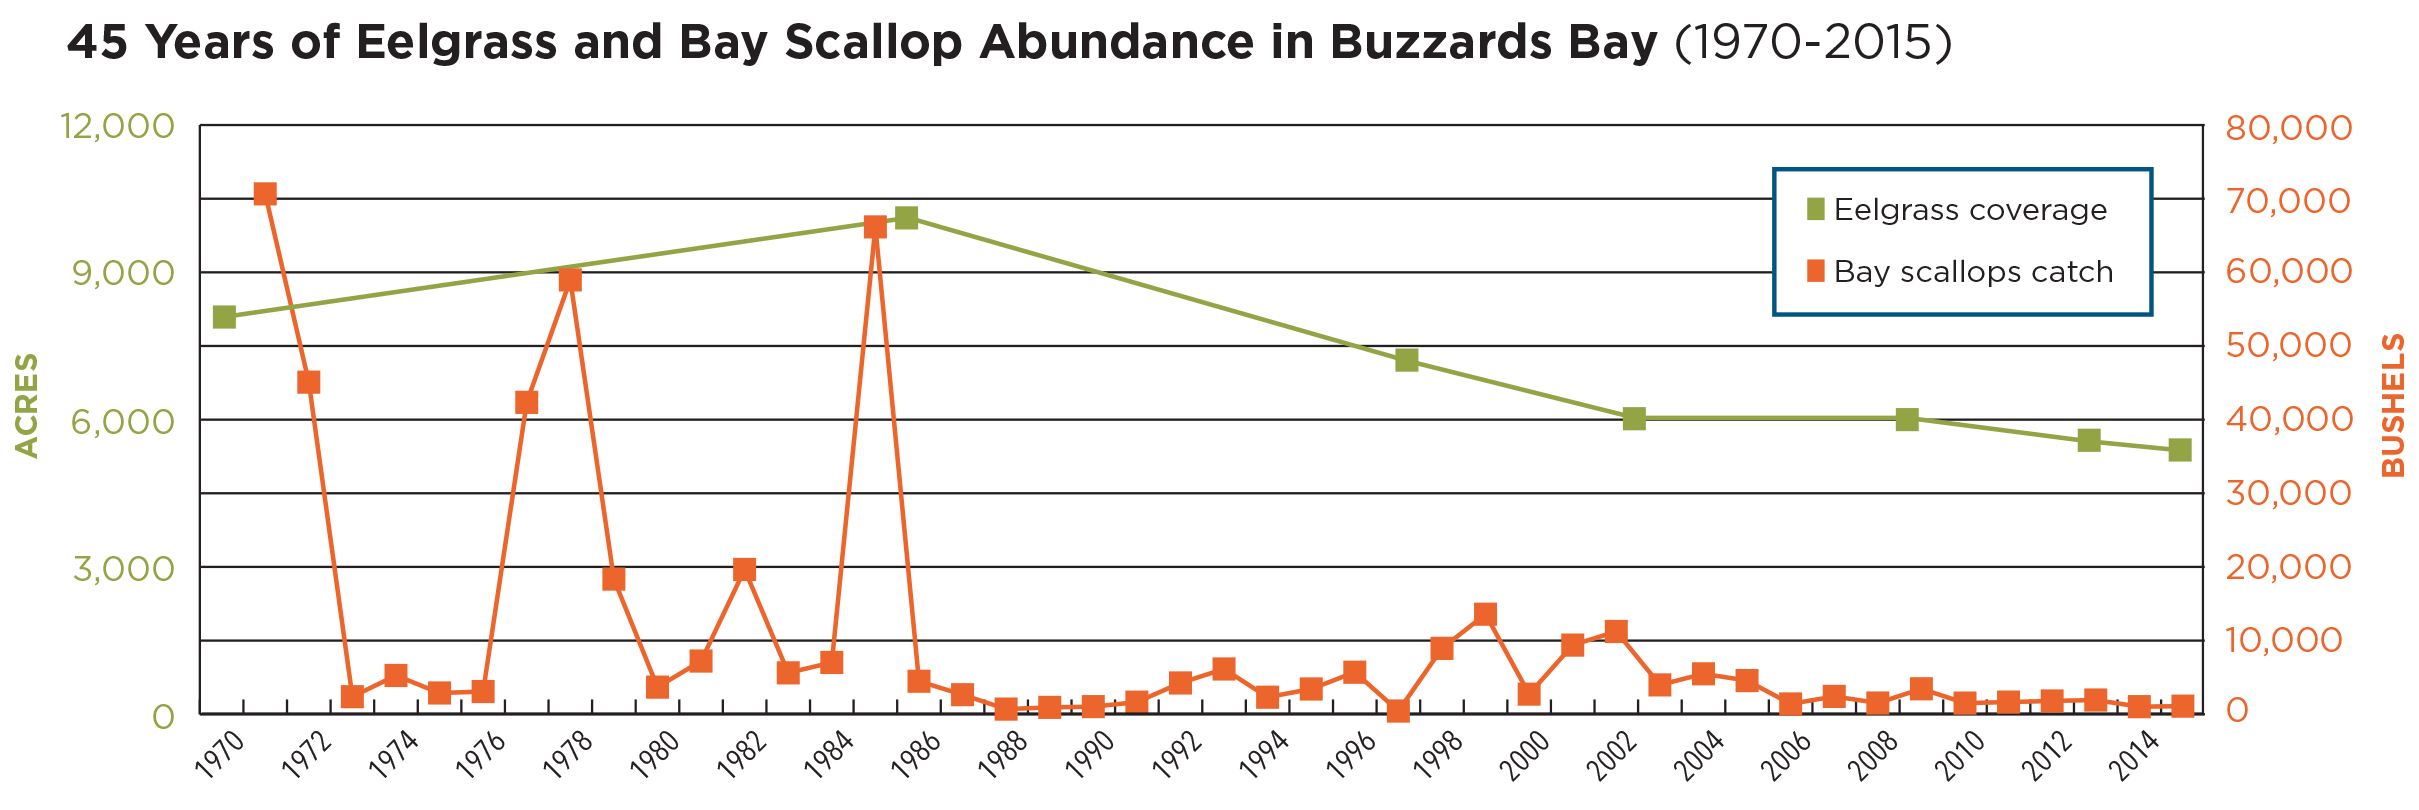 graph showing eelgrass acreage and bay scallop harvests in Buzzards Bay from 1970 to 2015